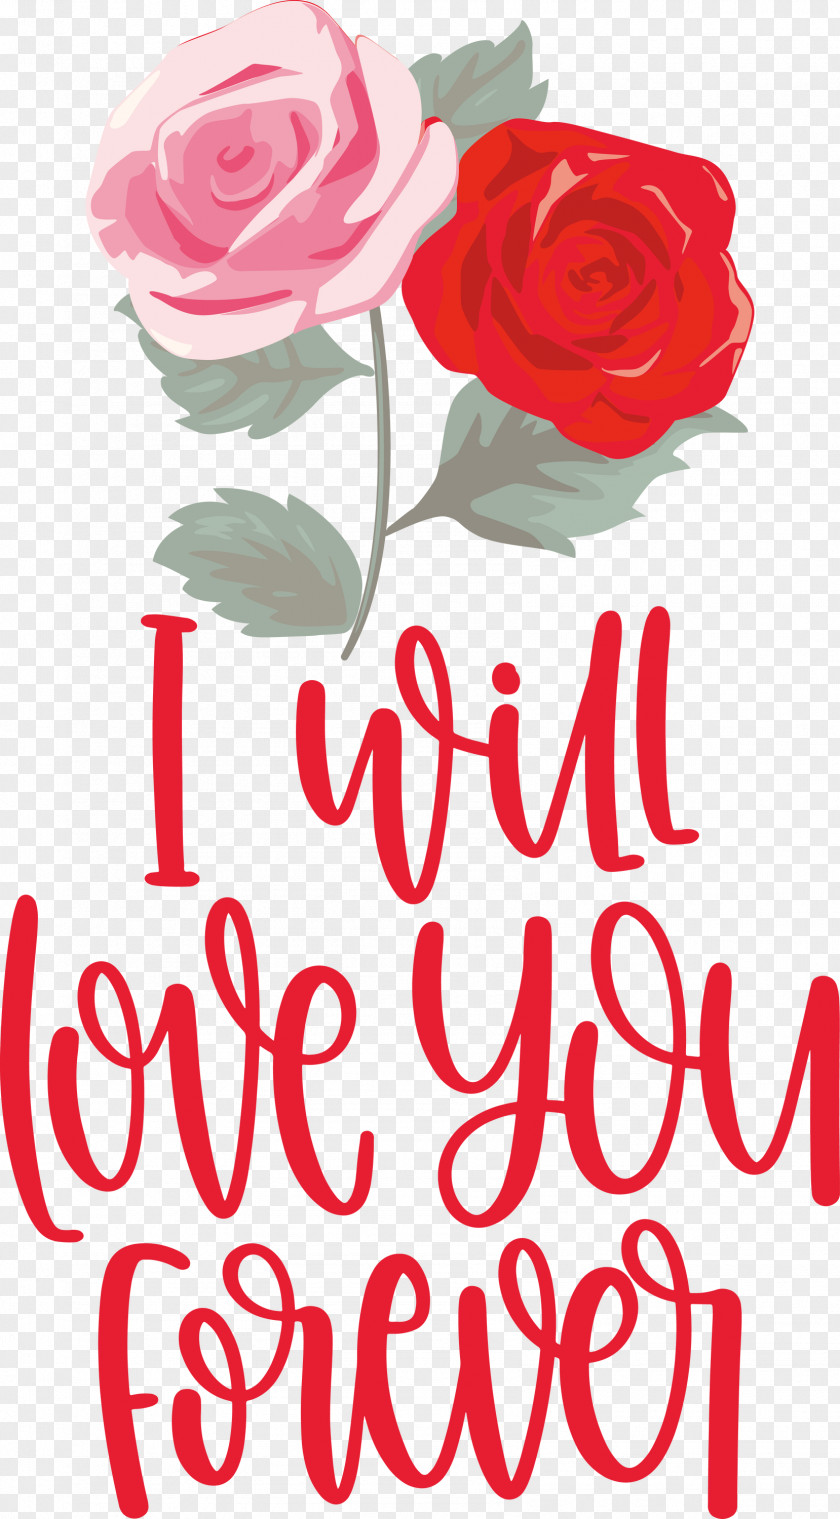 Love You Forever Valentines Day Quote PNG